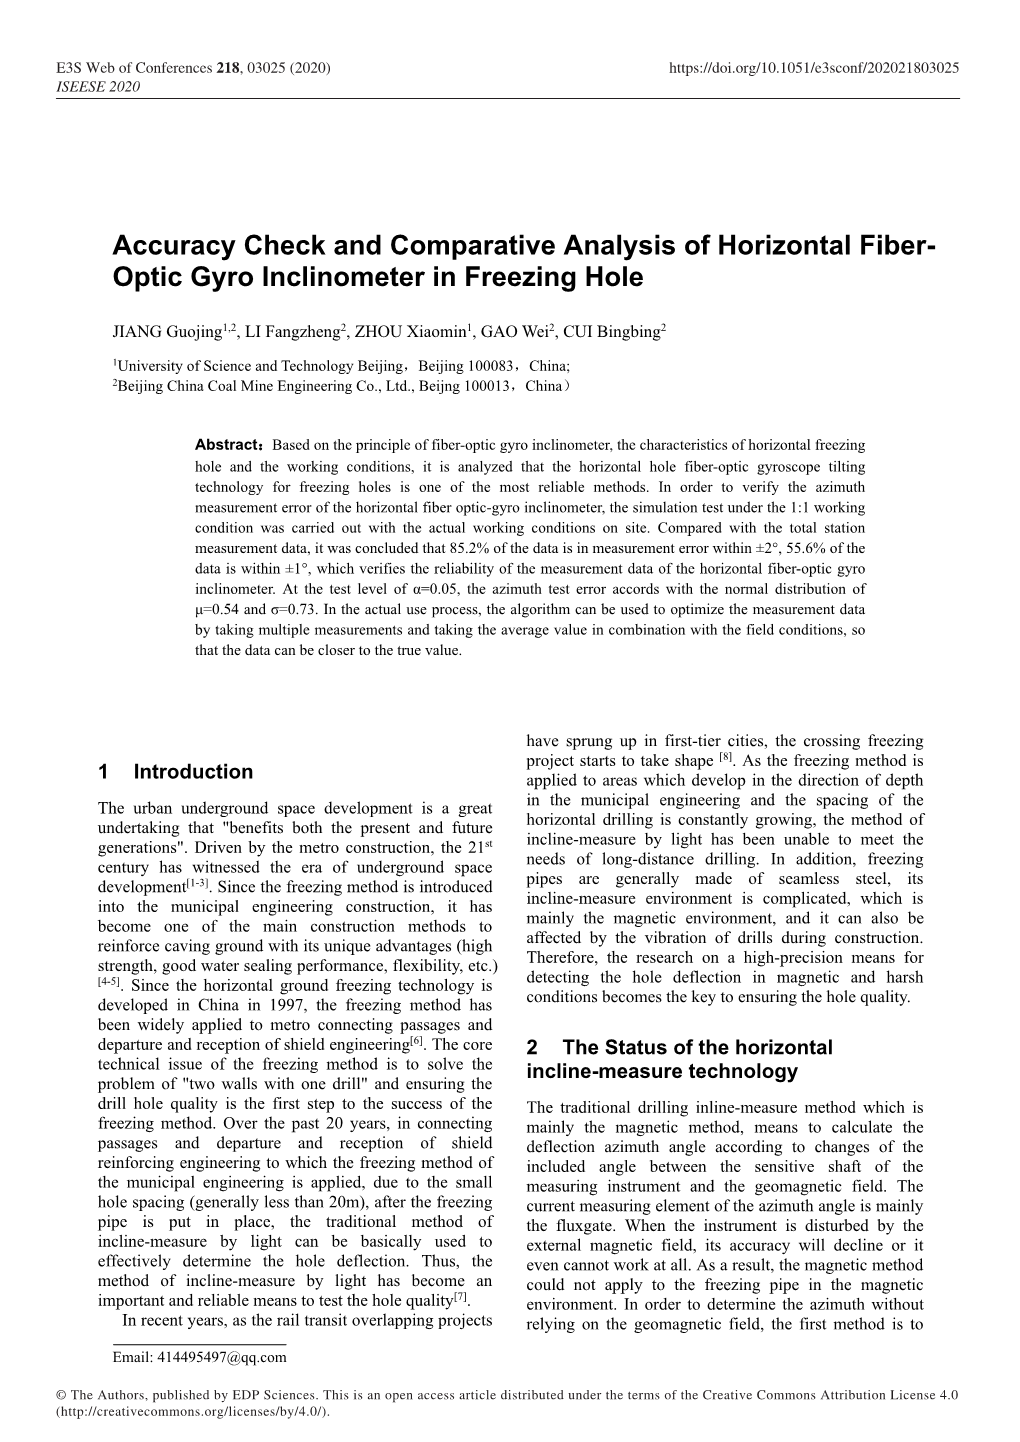 Accuracy Check and Comparative Analysis of Horizontal Fiber-Optic